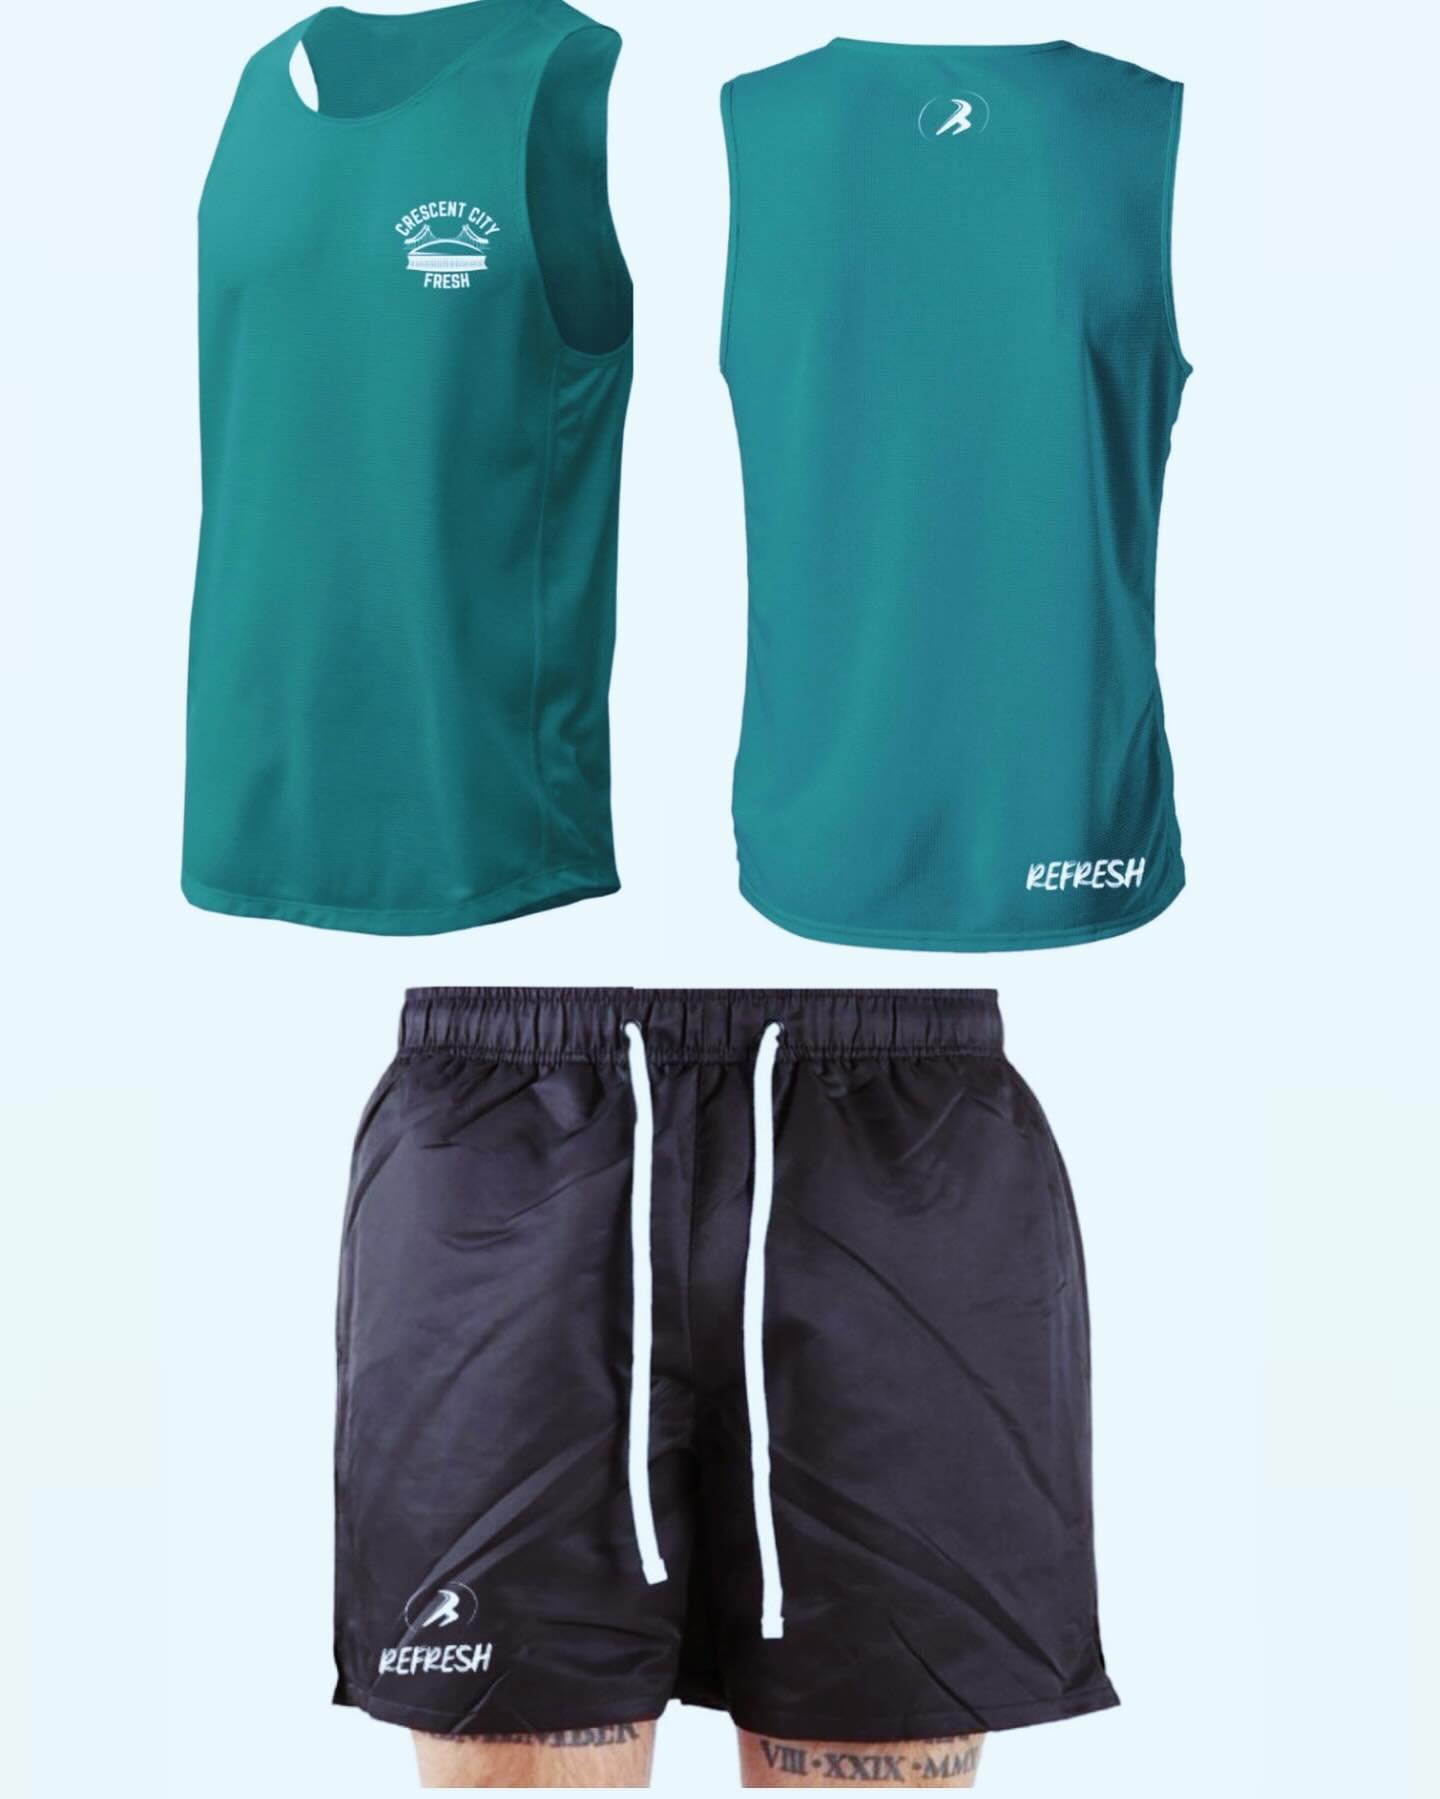 Summer Time Drip Is Here 🥵🔥🌊

Crescent City Fresh Tank Tops ✖️ Sports Performance Drifit Shorts are giving the ultimate summertime vibes 😎☀️🤙🏼

The tank top &amp; shorts duo are both moisture wicking, breathable, flexible, &amp; don&rsquo;t shr